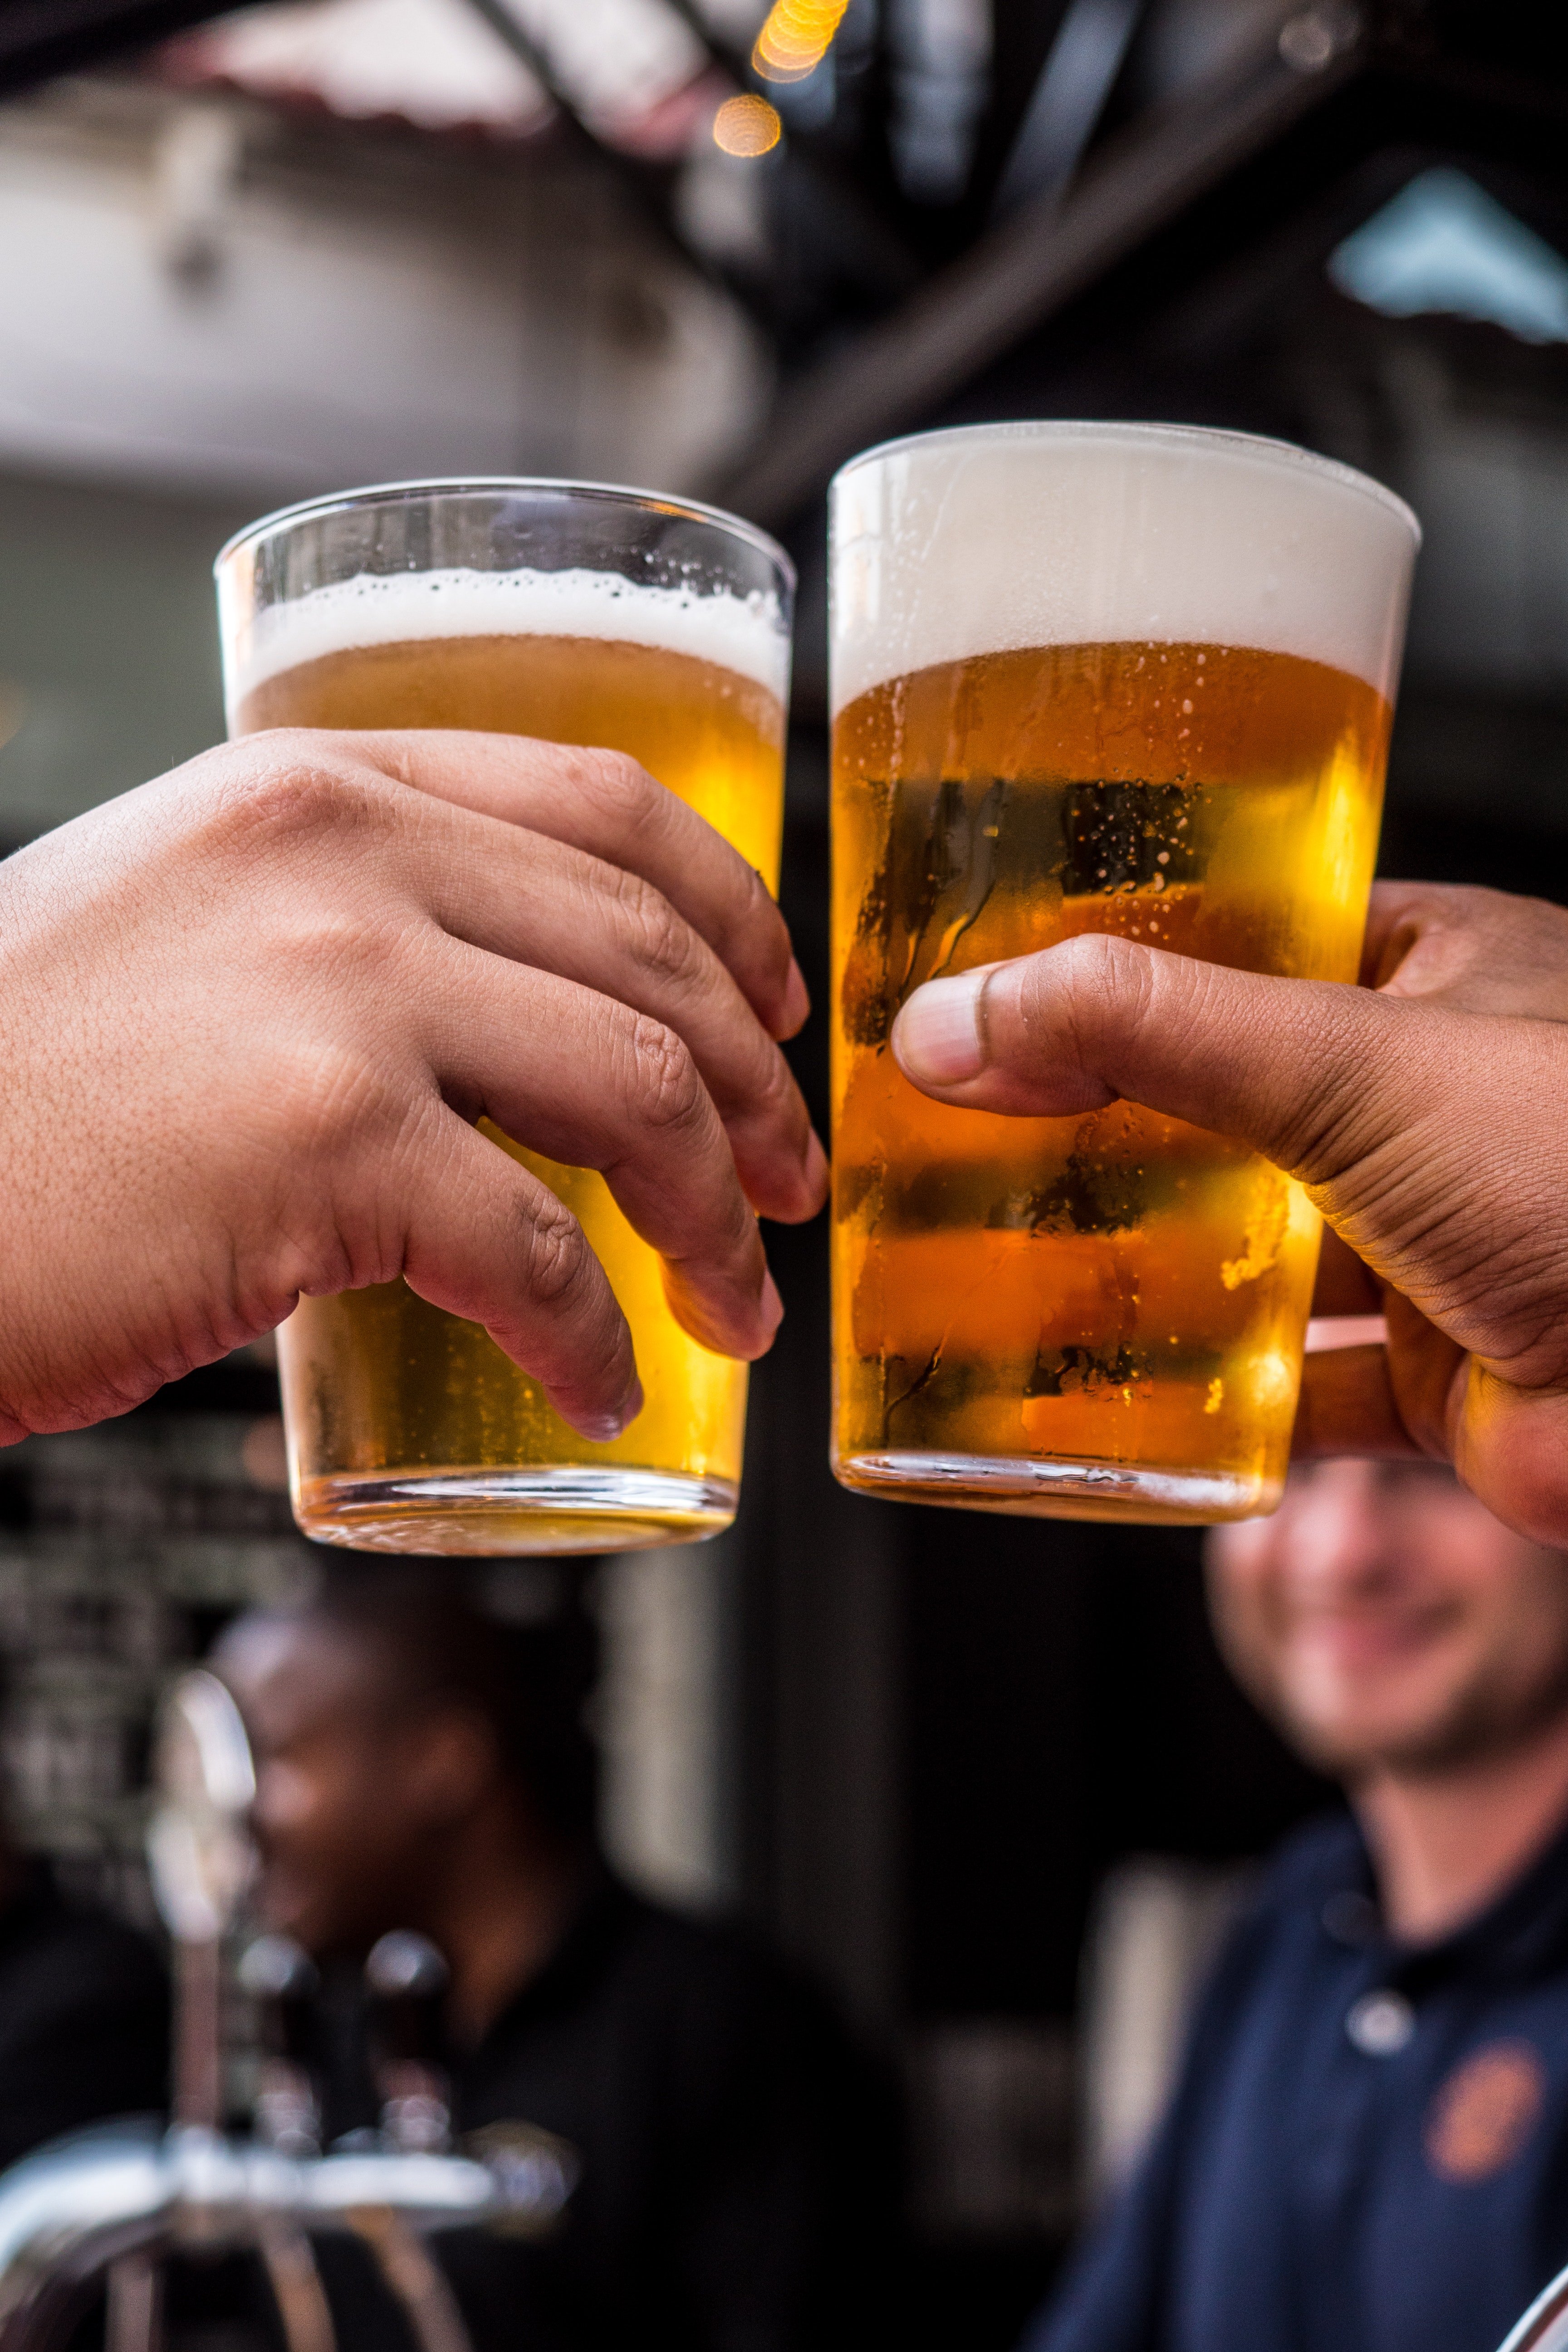 "Bottoms up, man," said one friend to the other. They then began downing drinks. | Photo: Pexels